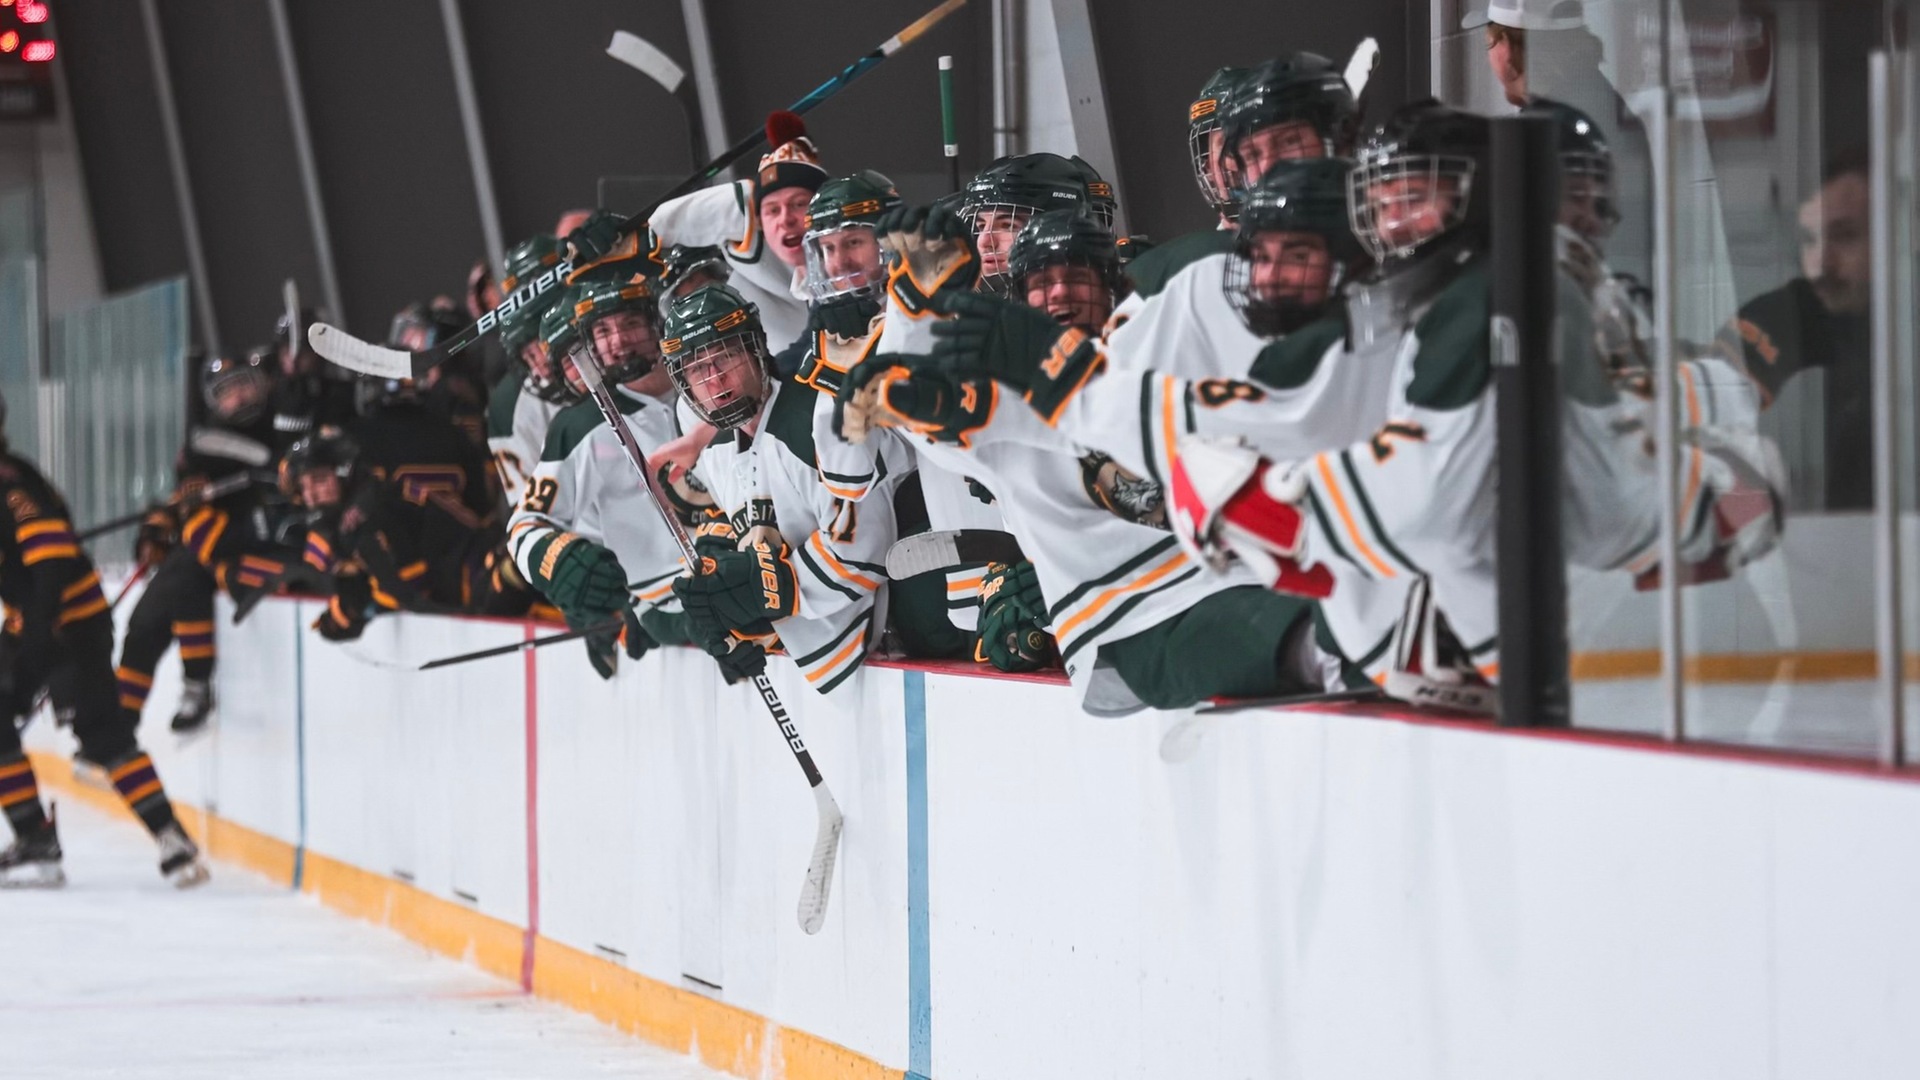 The PSC men's hockey team's bench celebrates after scoring in a recent game (Mercedes Rideout photo). Thumbnail